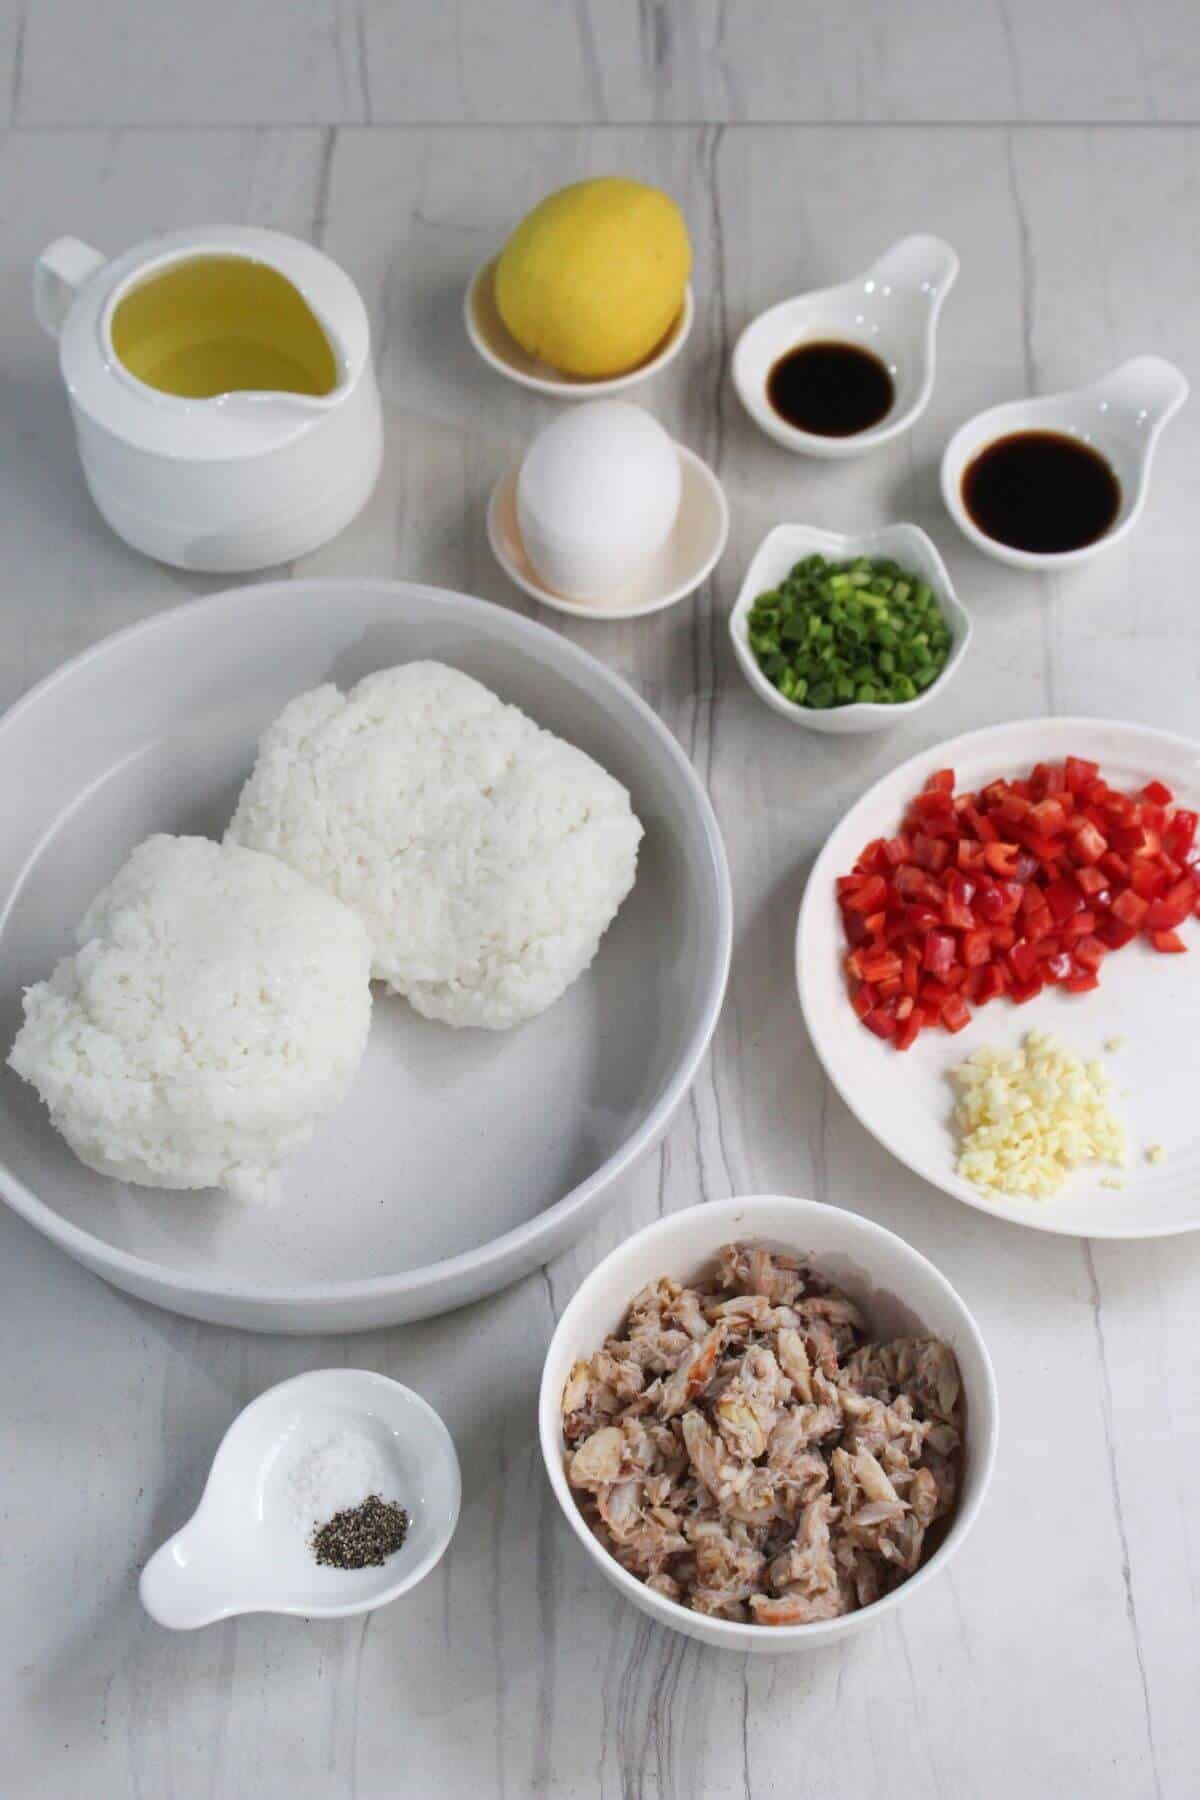 The ingredients for a dish of fried rice.